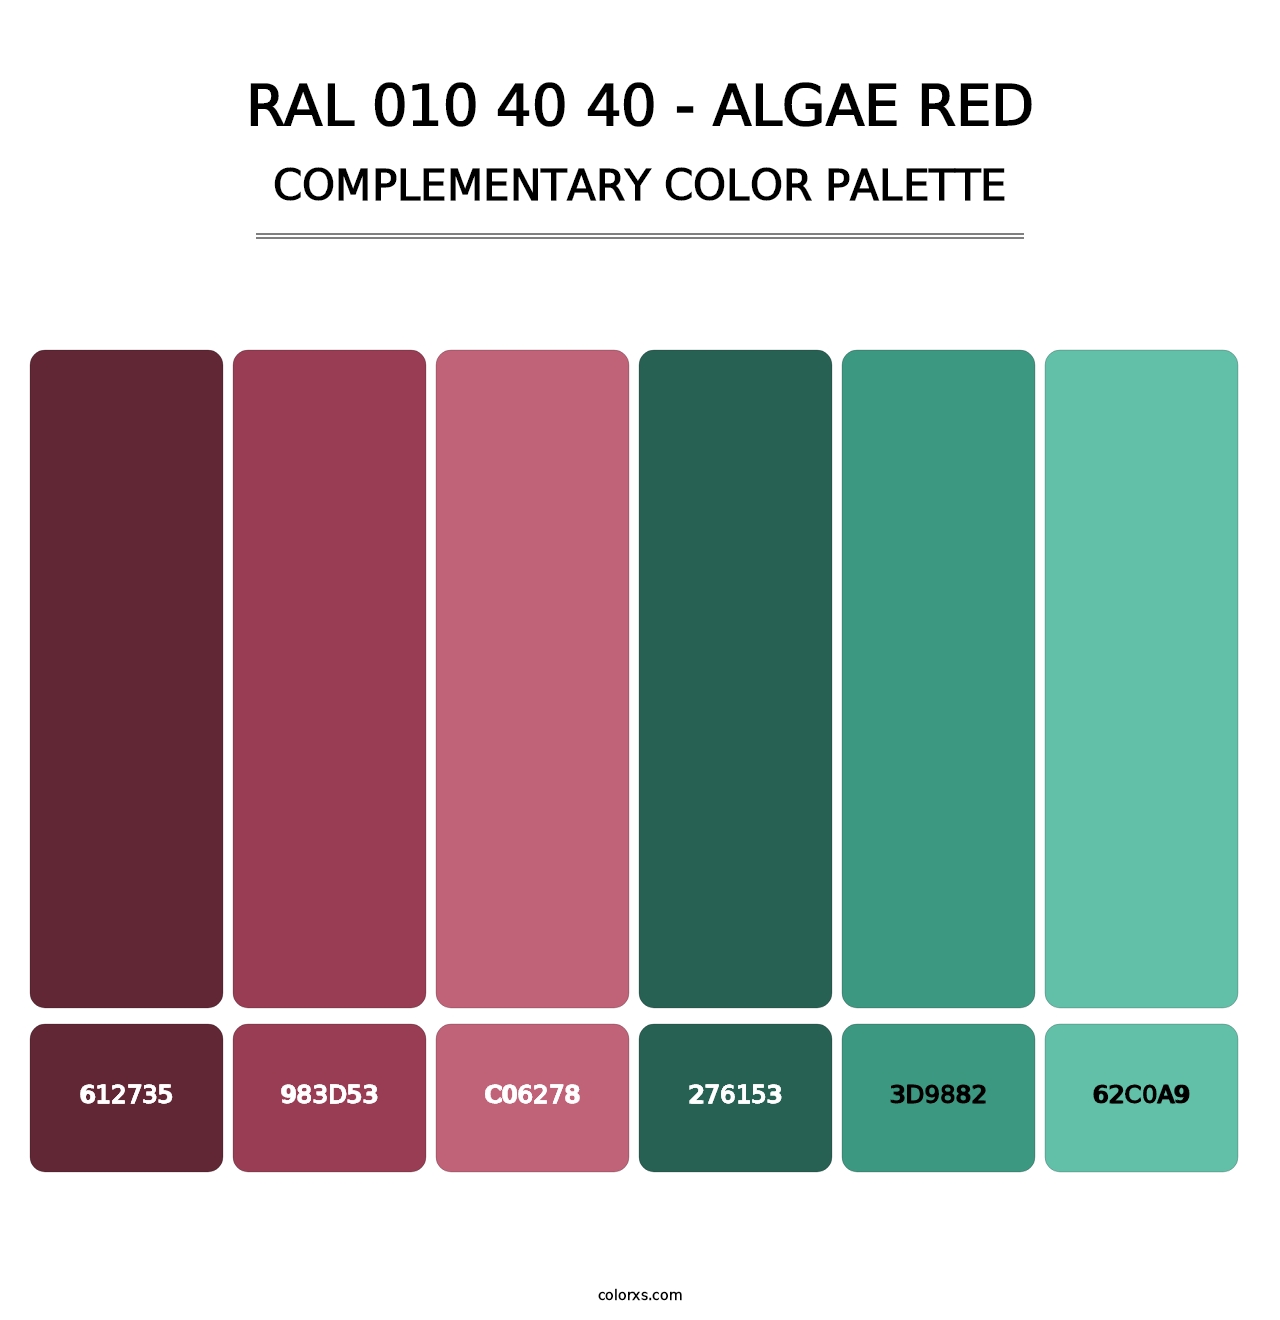 RAL 010 40 40 - Algae Red - Complementary Color Palette